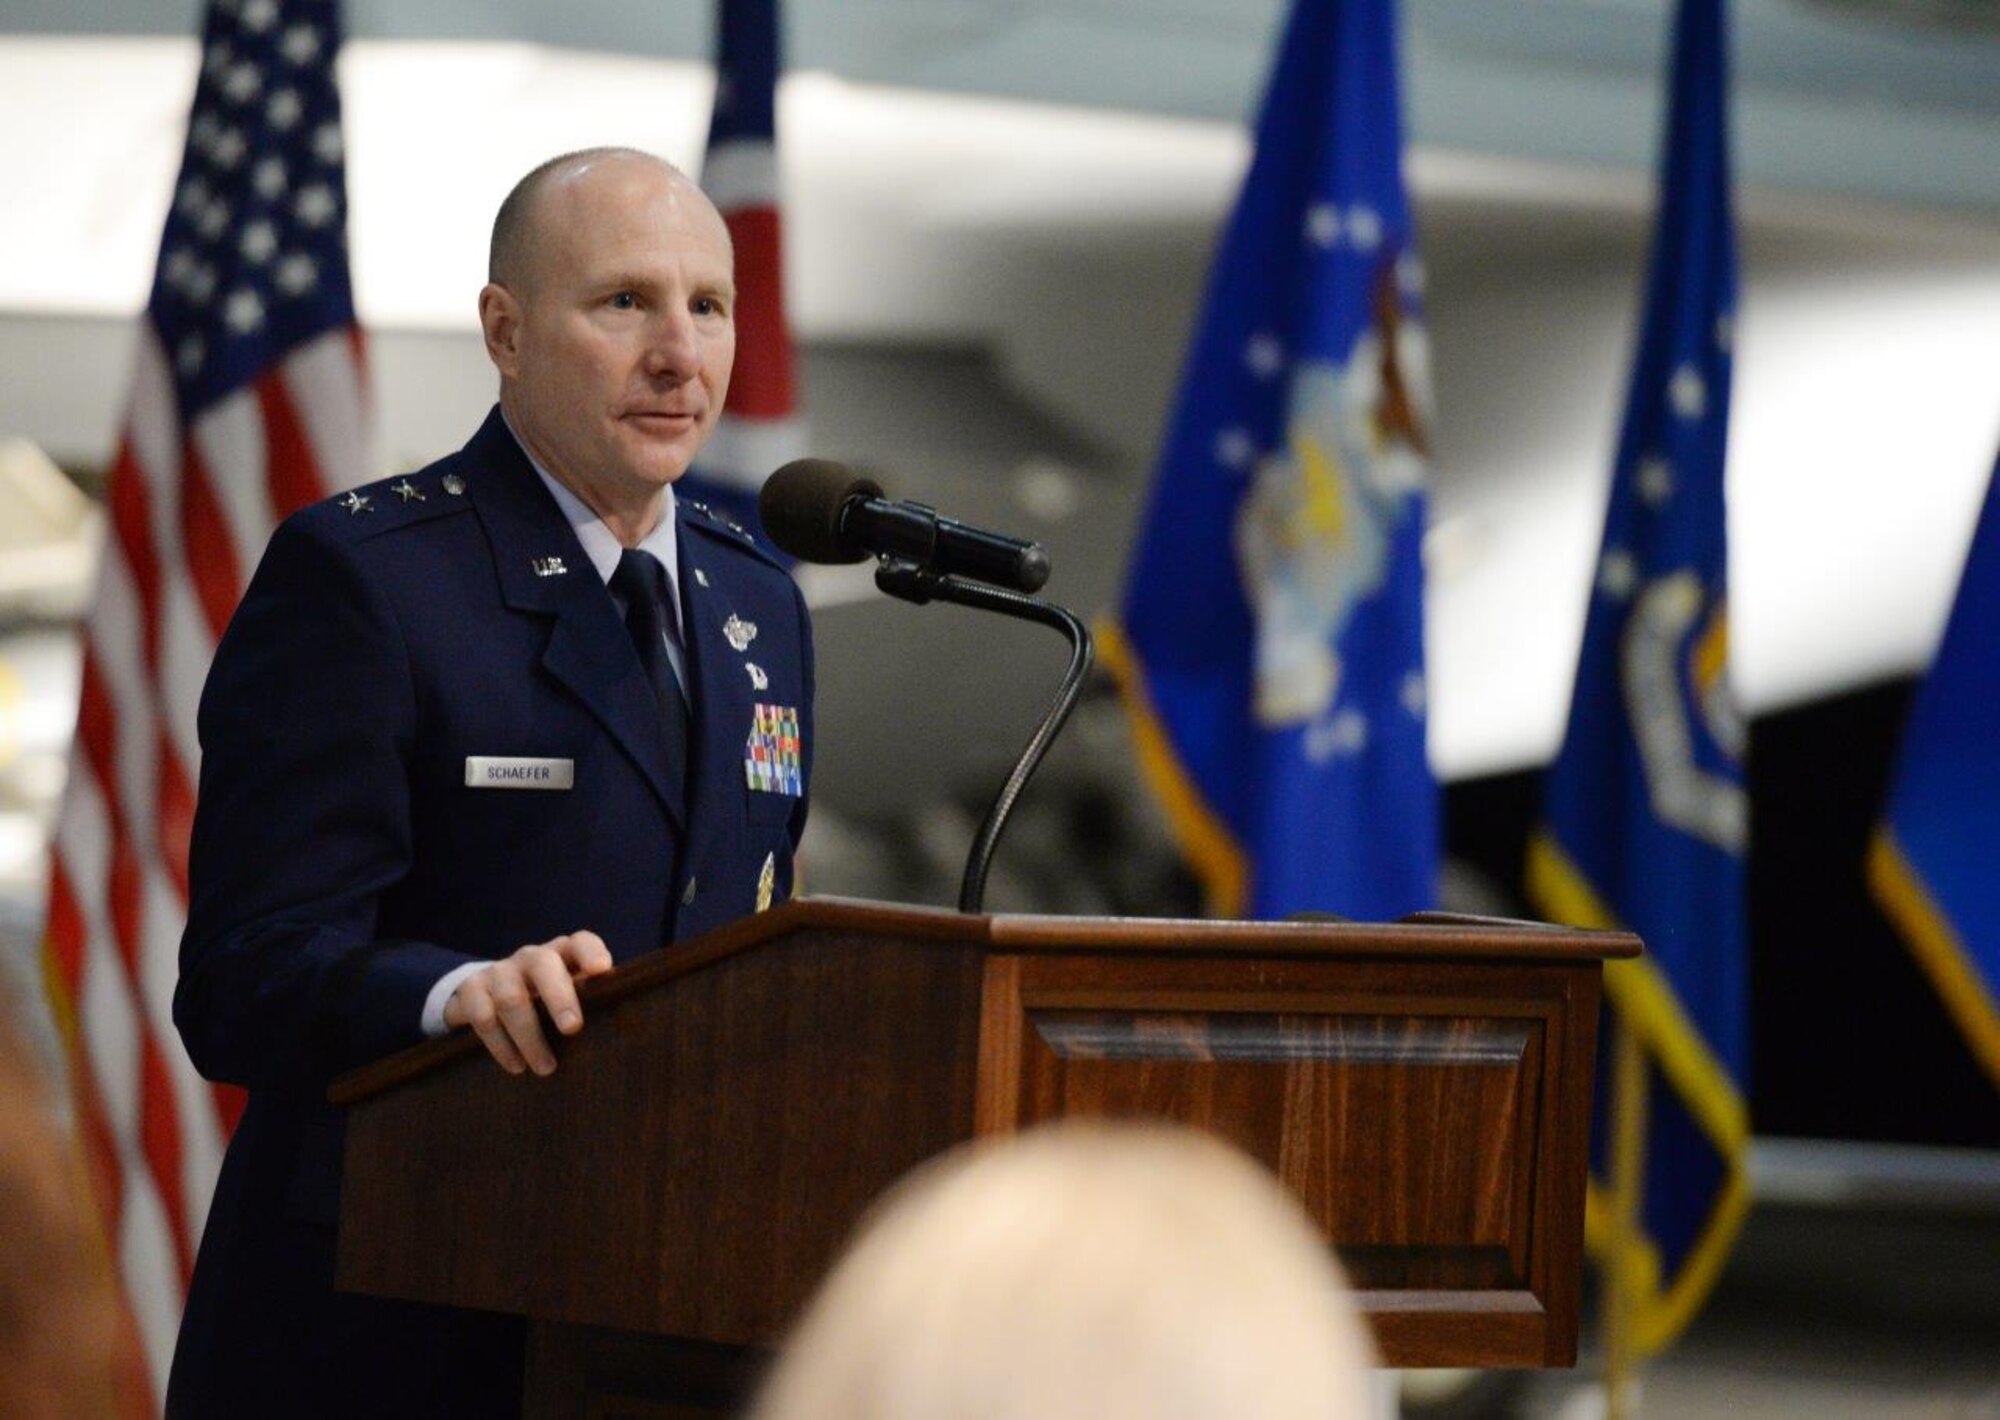 U.S. Air Force Maj. Gen. Carl Schaefer, Air Force Materiel Command vice commander, delivers remarks before the signing of Senate Bill 7 into law by Ohio Governor Mike DeWine at the National Museum of the United States Air Force, Wright-Patterson Air Force Base, Ohio, Jan. 27, 2020. The bill mandates Ohio agencies to issue licenses or certificates to qualifying military members and their spouses. (U.S. Air Force photo by Wesley Farnsworth)